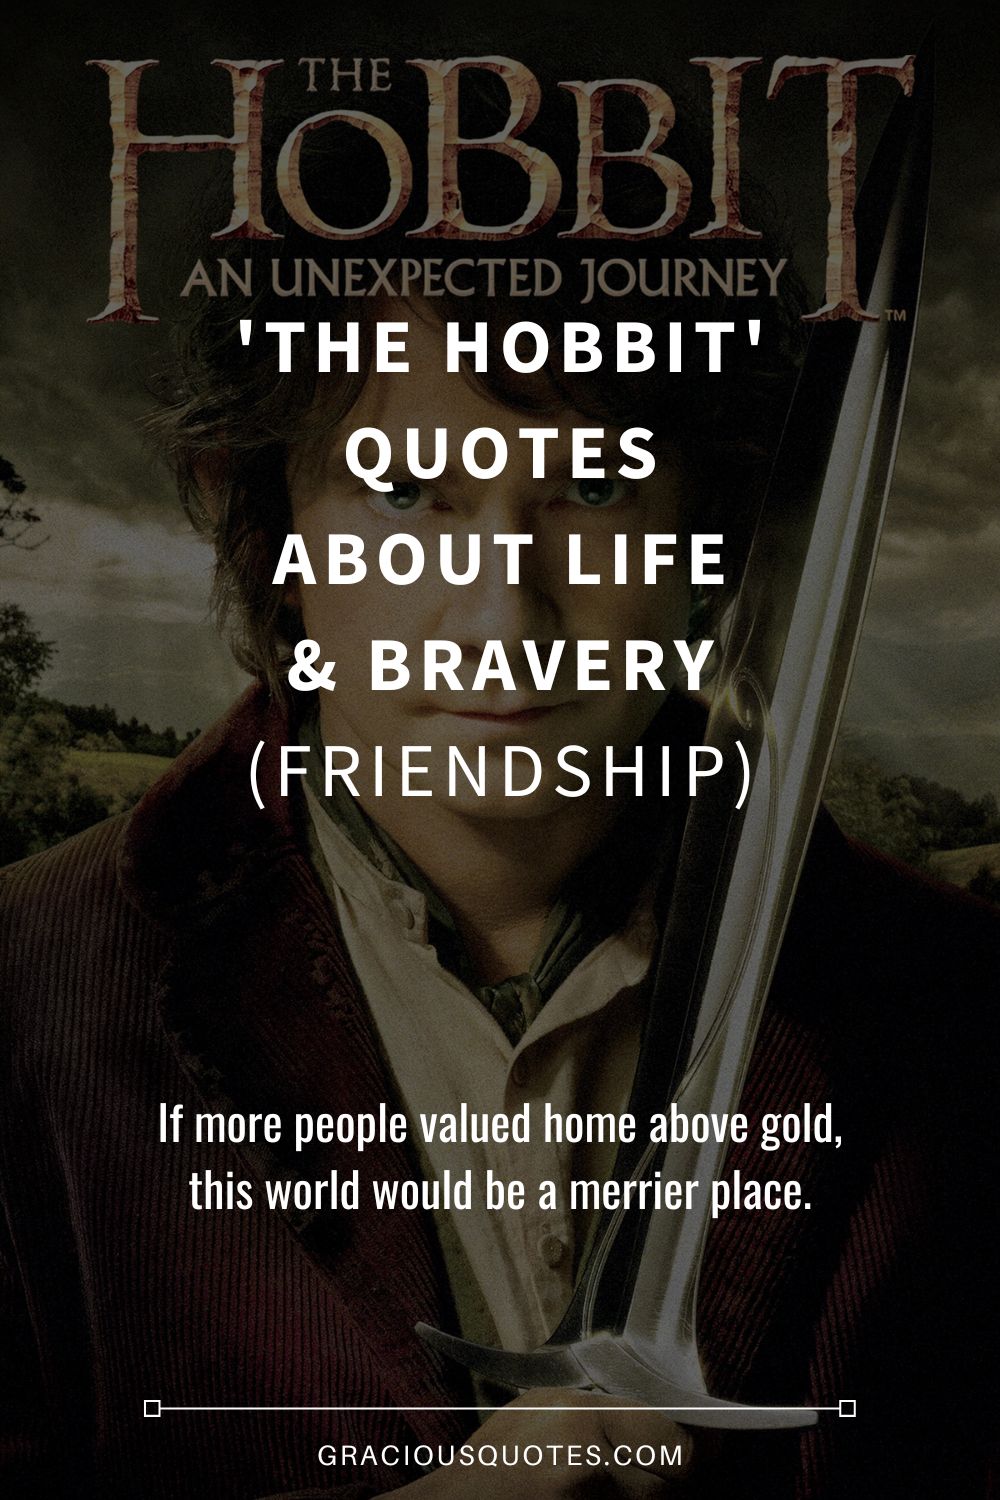 'The Hobbit' Quotes About Life & Bravery (FRIENDSHIP) - Gracious Quotes